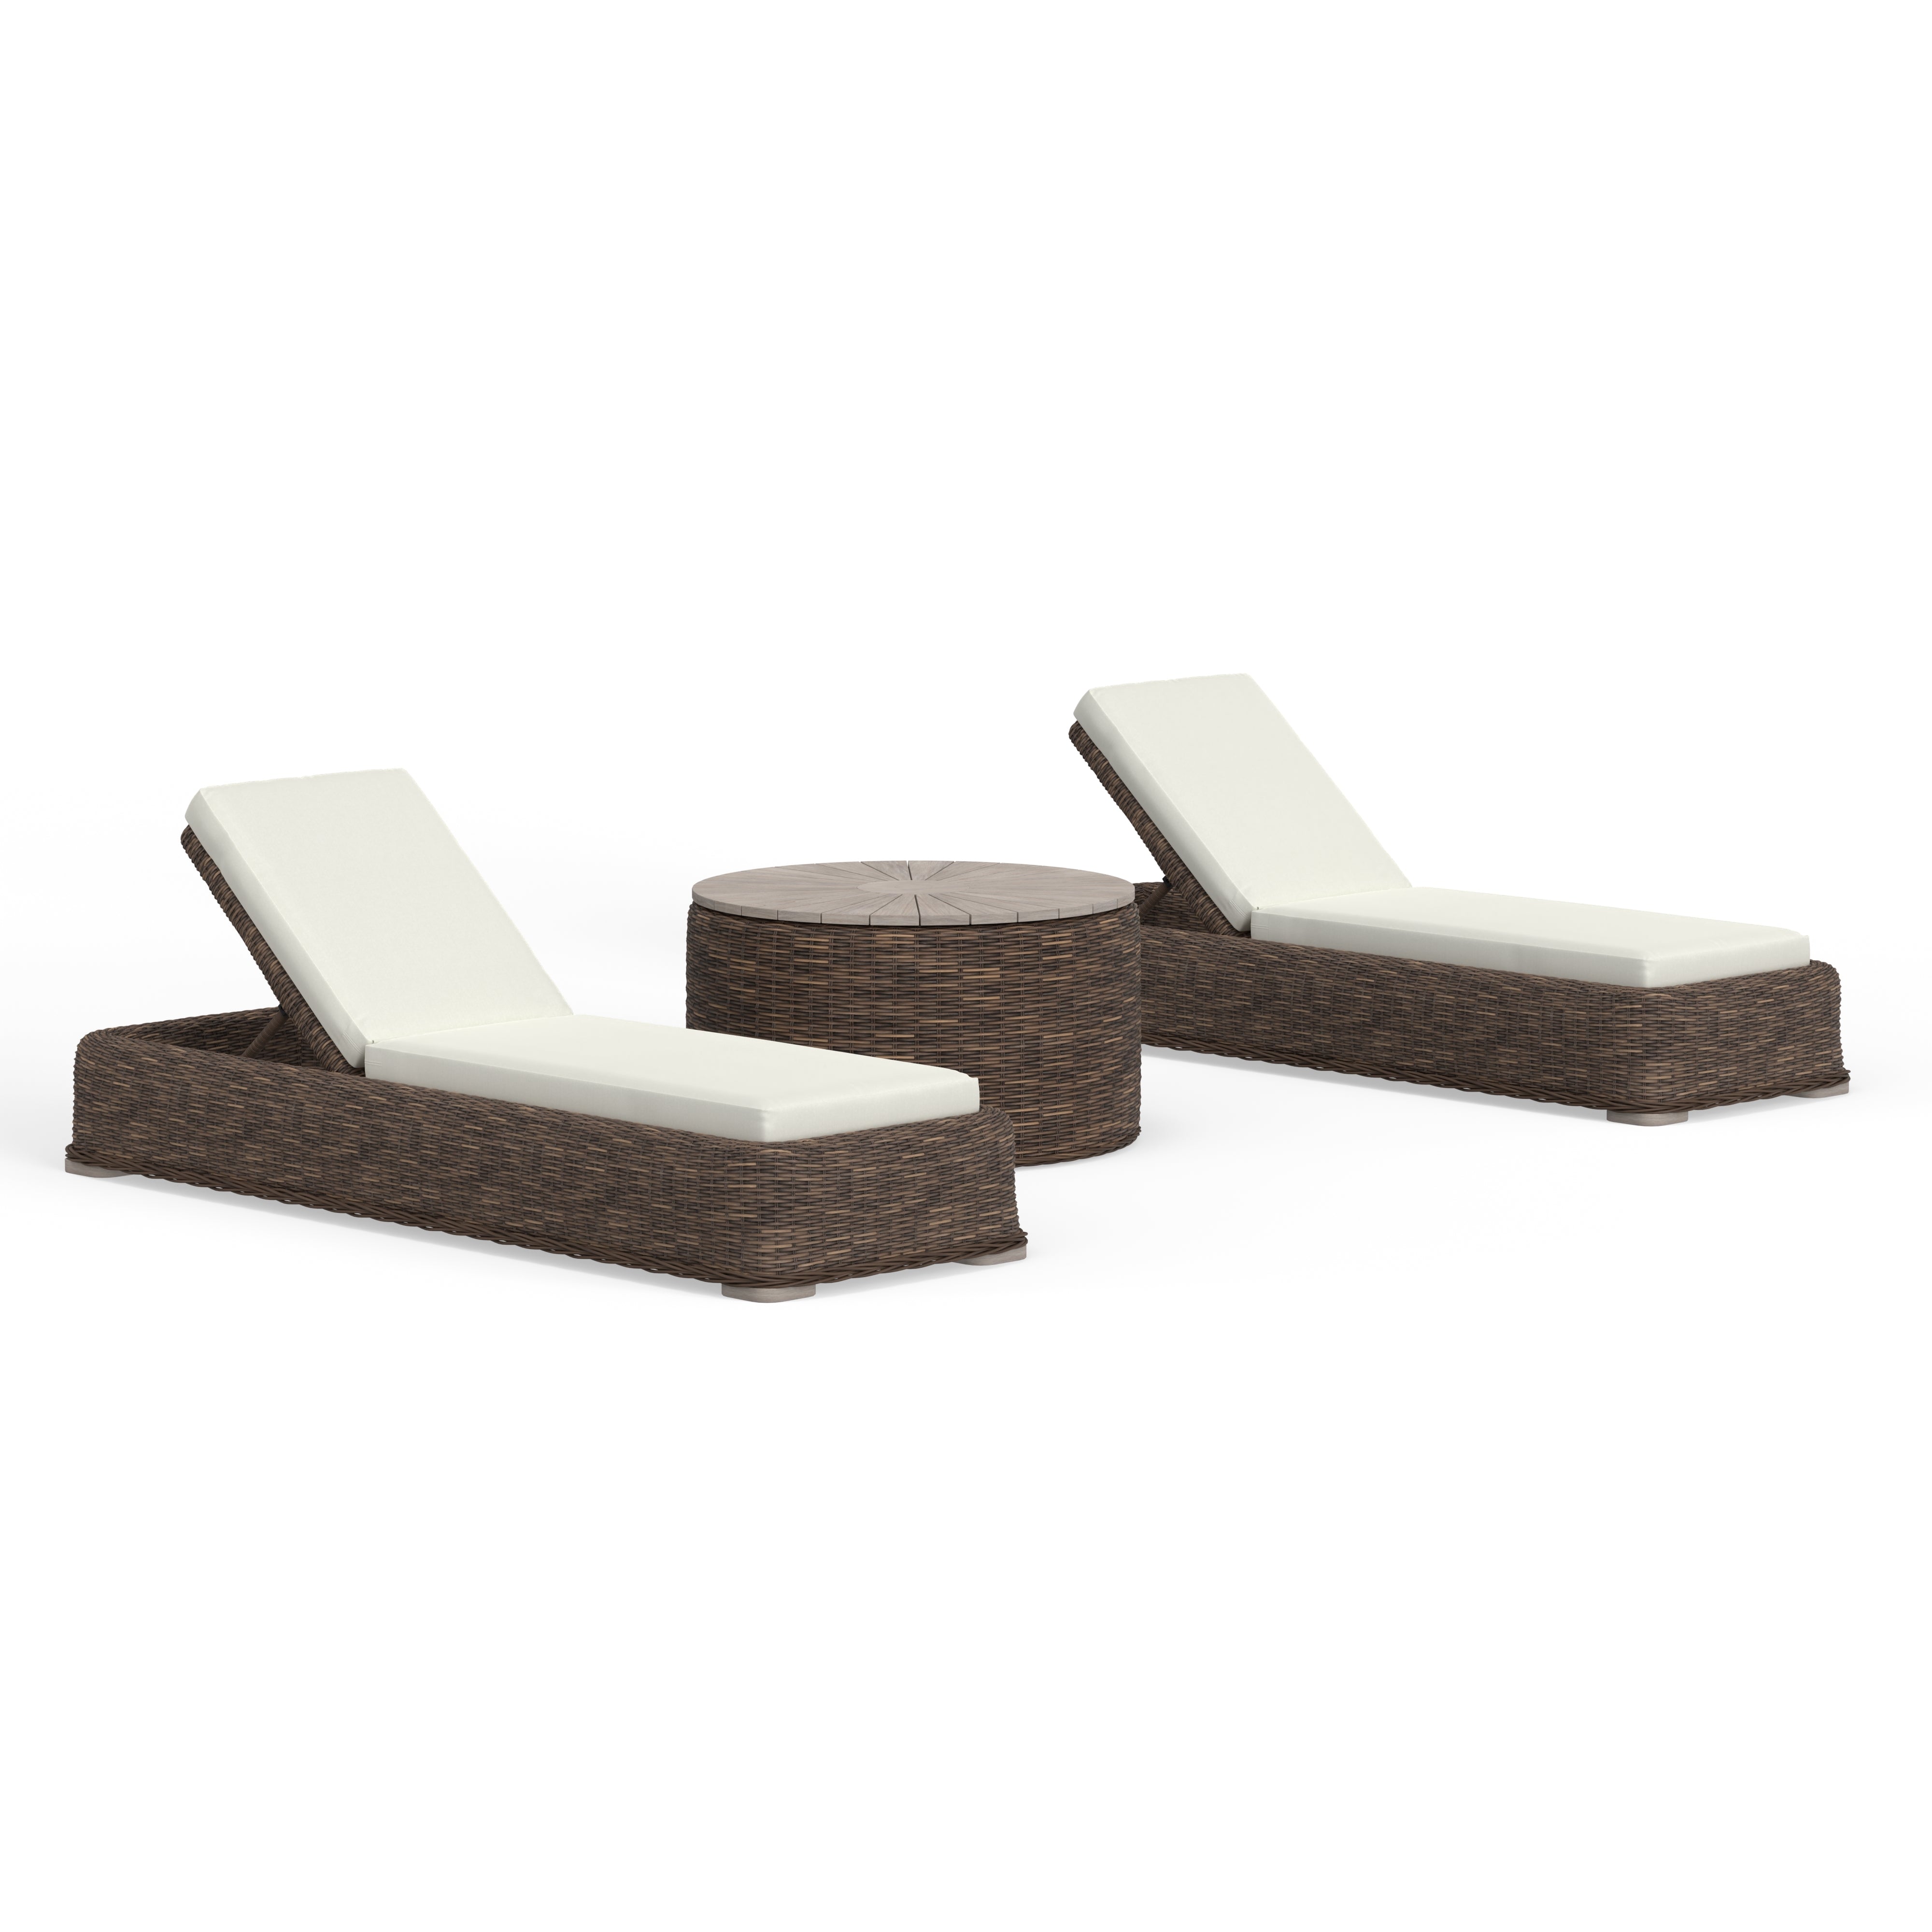 Highest Quality Outdoor Wicker Chaise Loungers